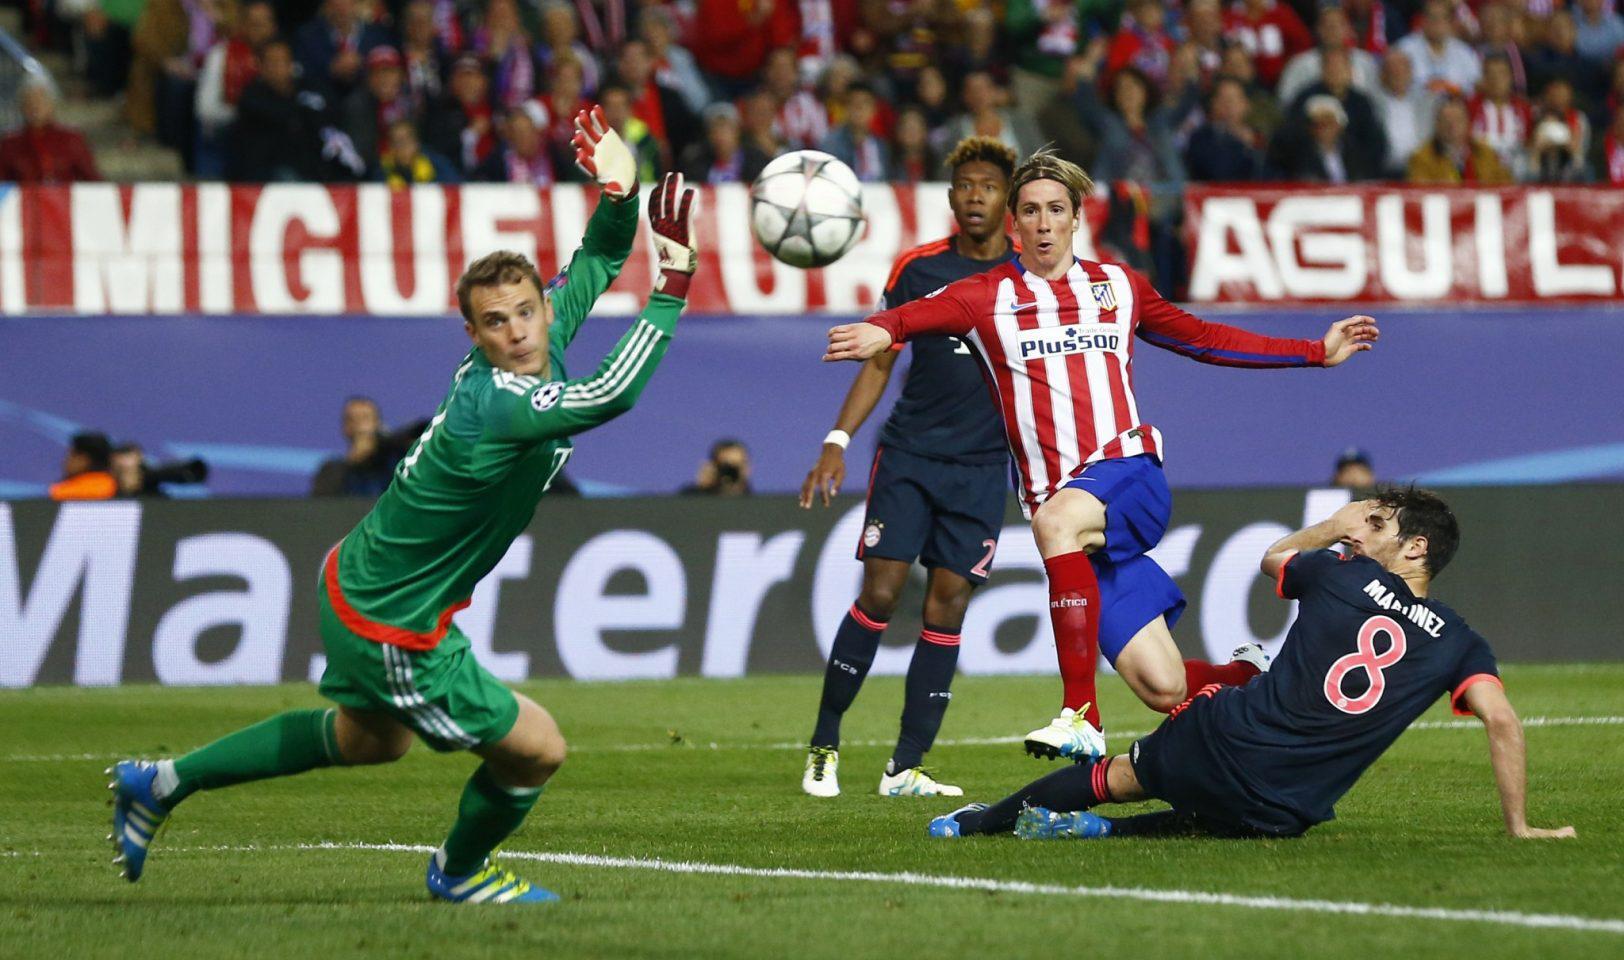 Football Soccer - Atletico Madrid v Bayern Munich - UEFA Champions League Semi Final First Leg - Vicente Calderon Stadium - 27/4/16 Atletico Madrid's Fernando Torres hits the post Reuters / Michael Dalder Livepic EDITORIAL USE ONLY.